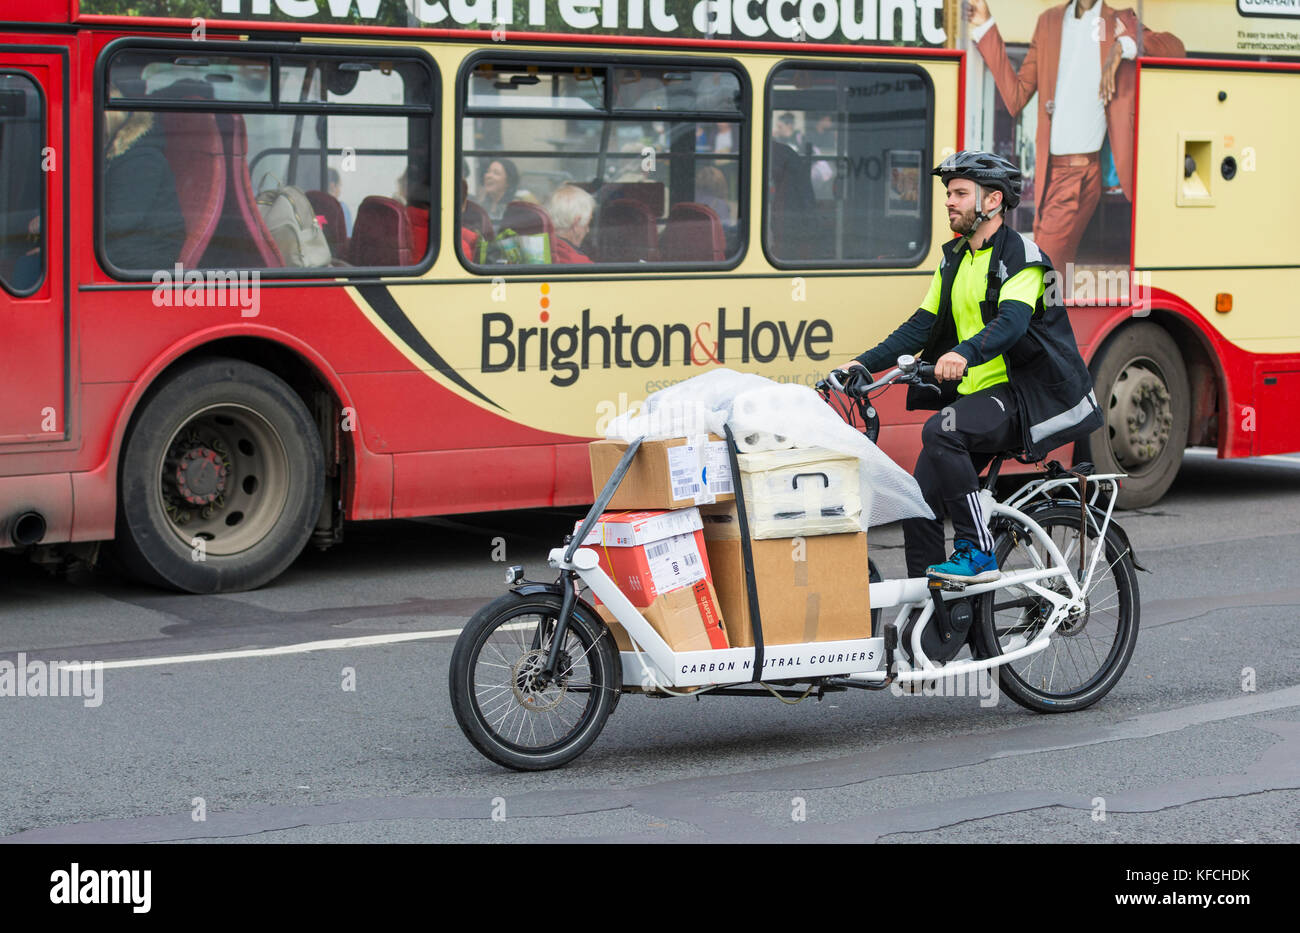 Cyclist on a pedal powered delivery vehicle working for Carbon Neutral Couriers, making deliveries in the city in Brighton, East Sussex, England, UK. Stock Photo